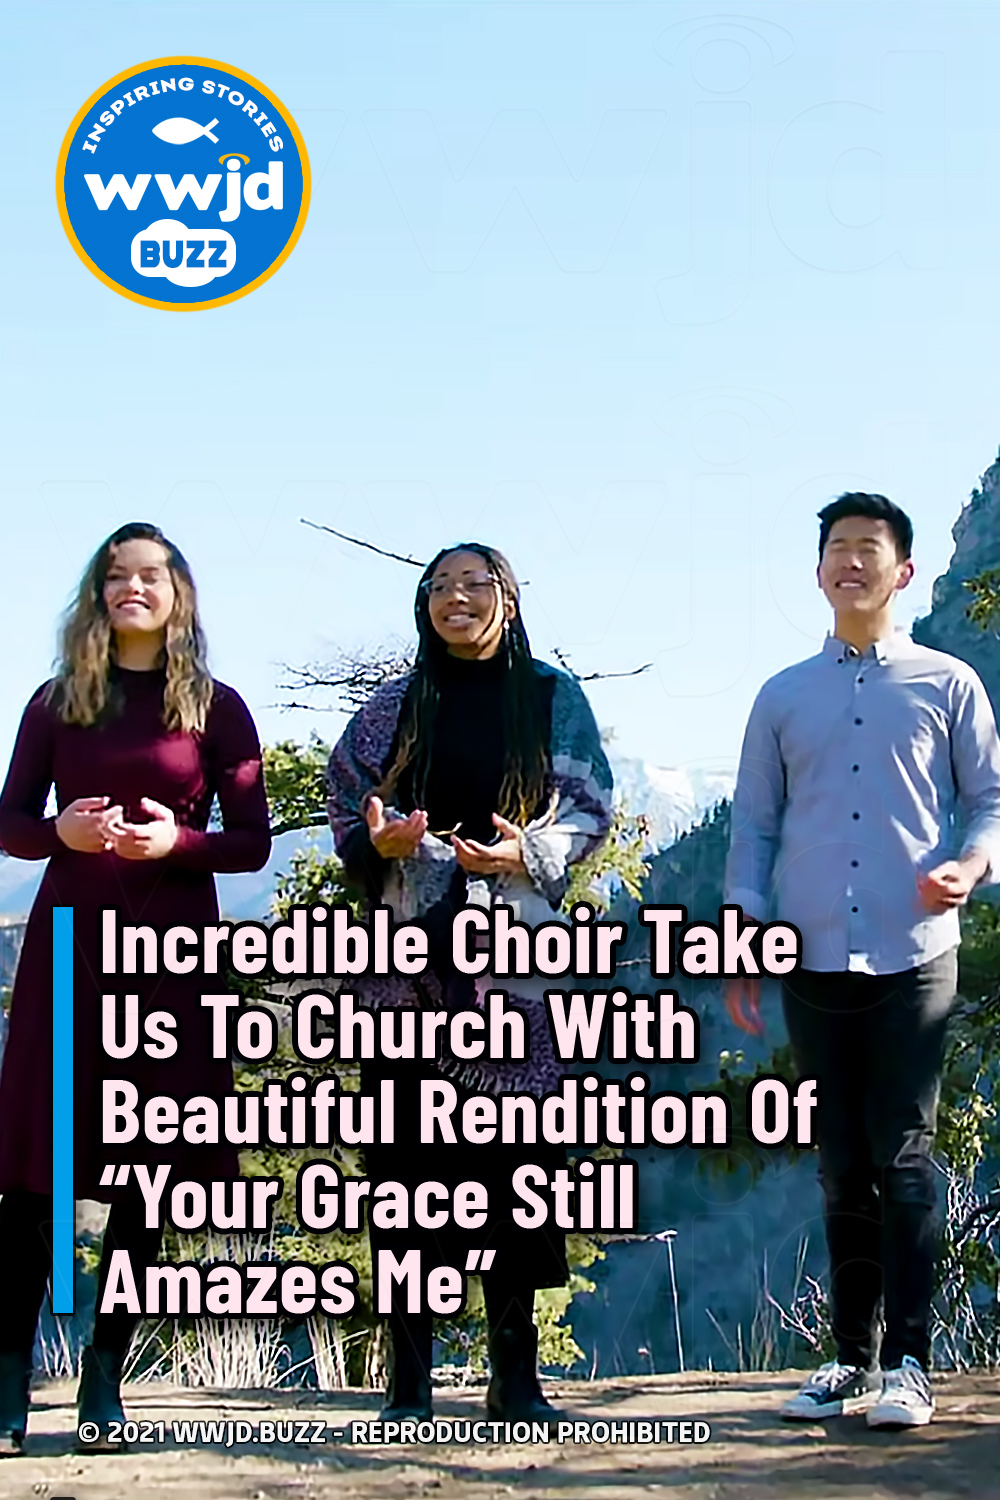 Incredible Choir Take Us To Church With Beautiful Rendition Of “Your Grace Still Amazes Me”